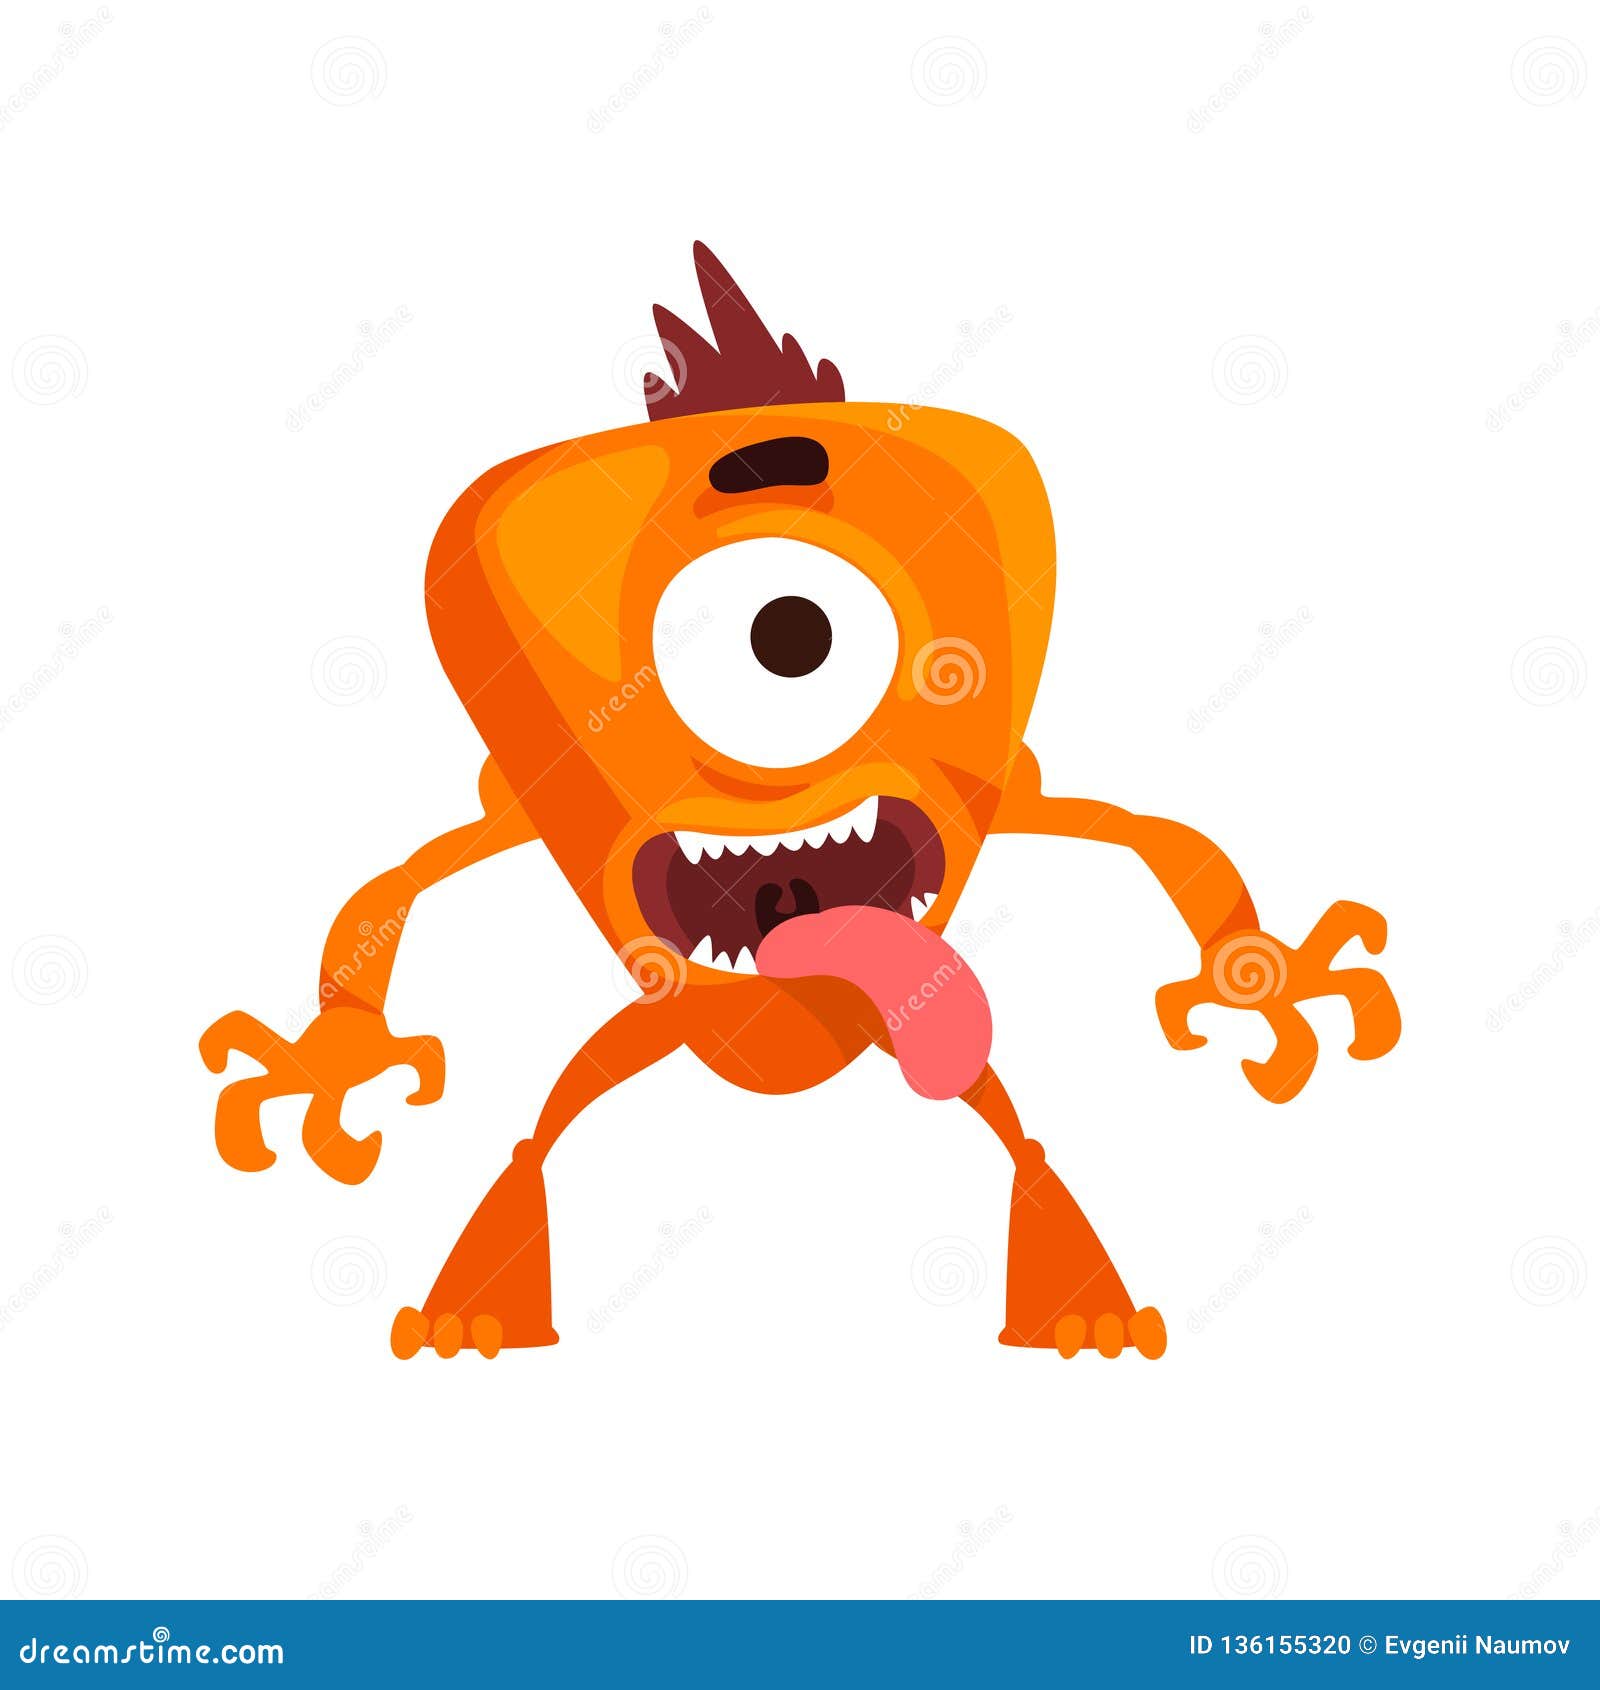 Funny One Eyed Monster with Its Tongue Out, Fabulous Creature Cartoon  Character Vector Illustration Stock Vector - Illustration of eyes, bright:  136155320